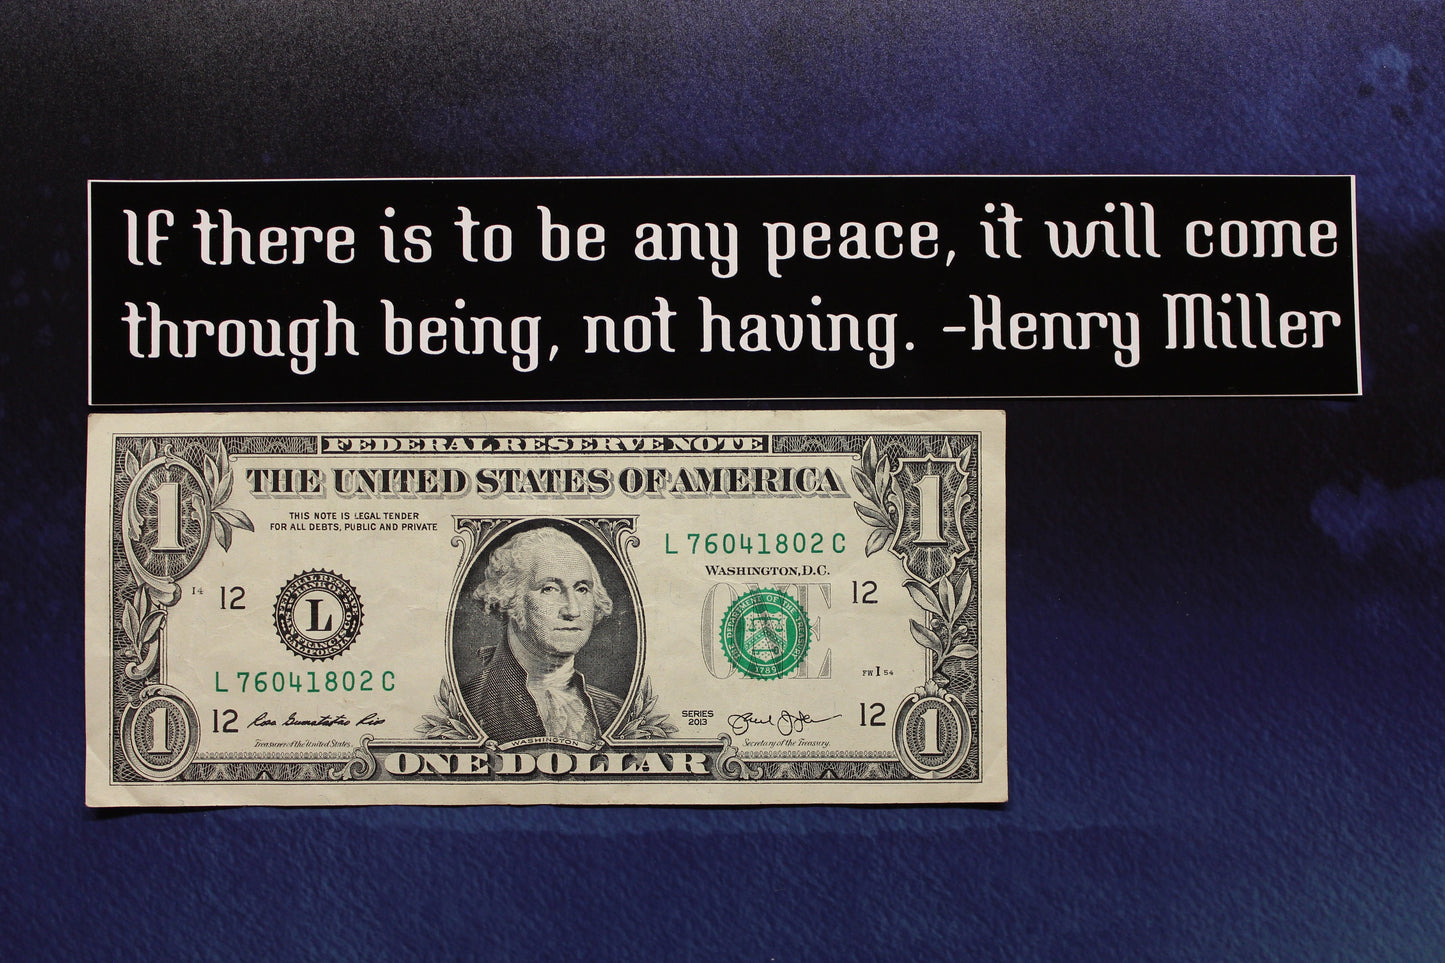 Henry Miller Vinyl Bumper Sticker If there is to be any peace... Vinyl Bumper Sticker car bike laptop guitar